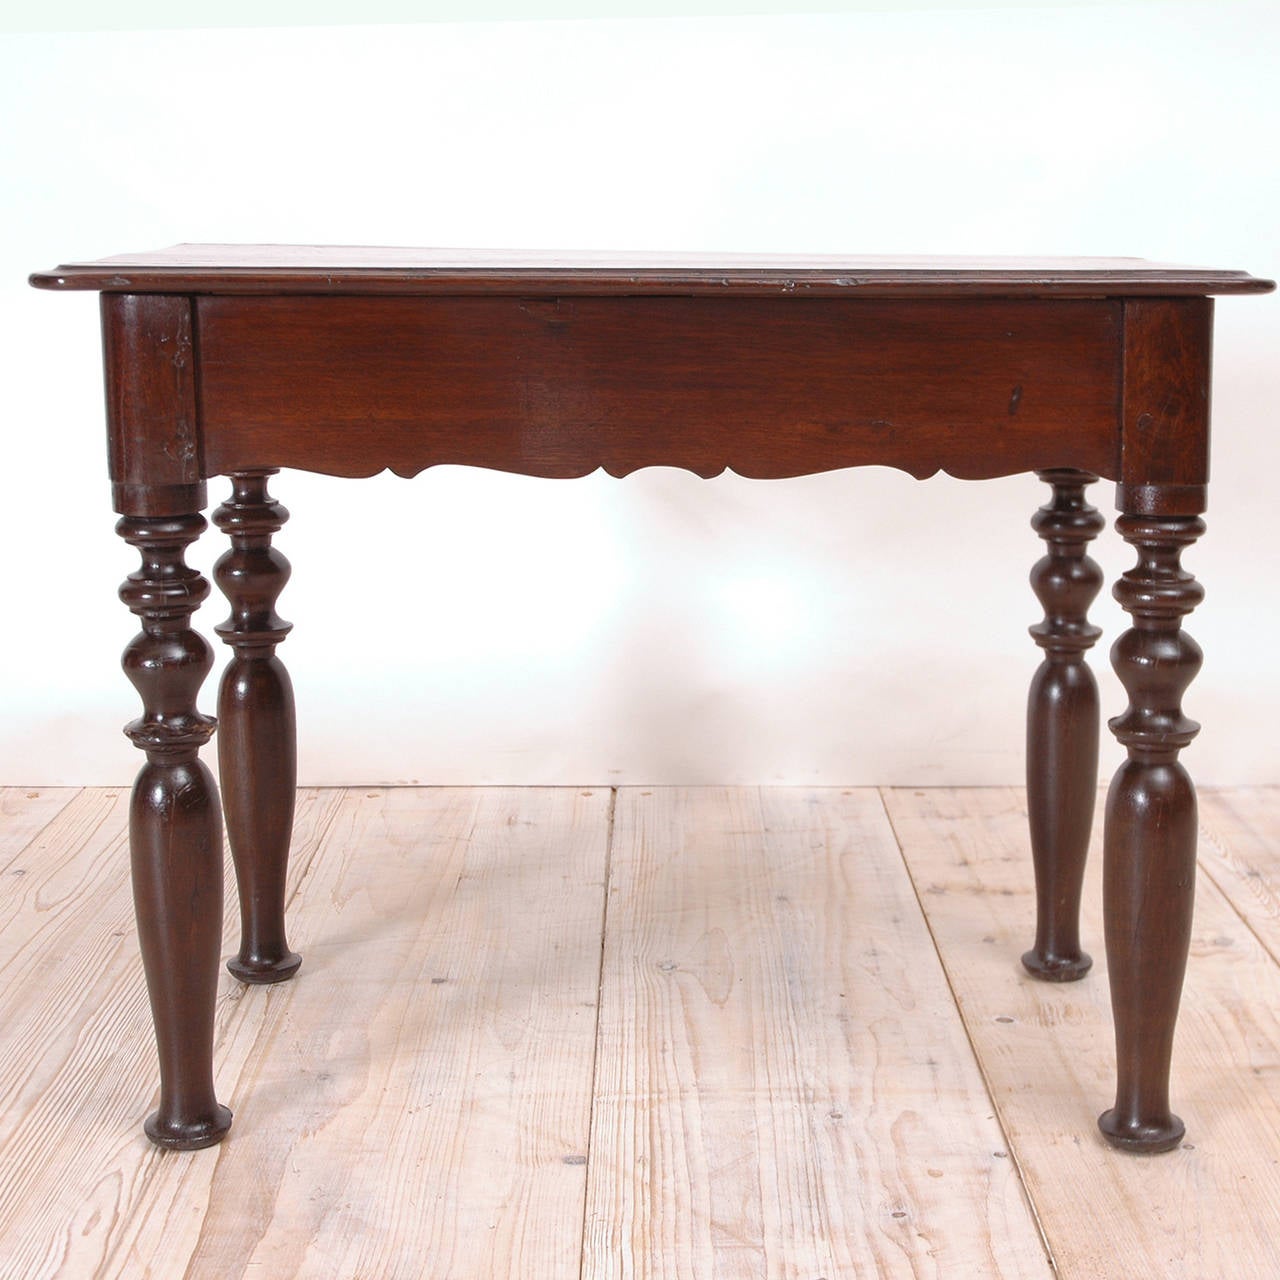 From Dutch Guiana (present-day Suriname), a small handsome table in mahogany with scalloped apron and turned legs. Features pegged construction and a rich dark patina, circa 1800.
Measures: 15 1/2